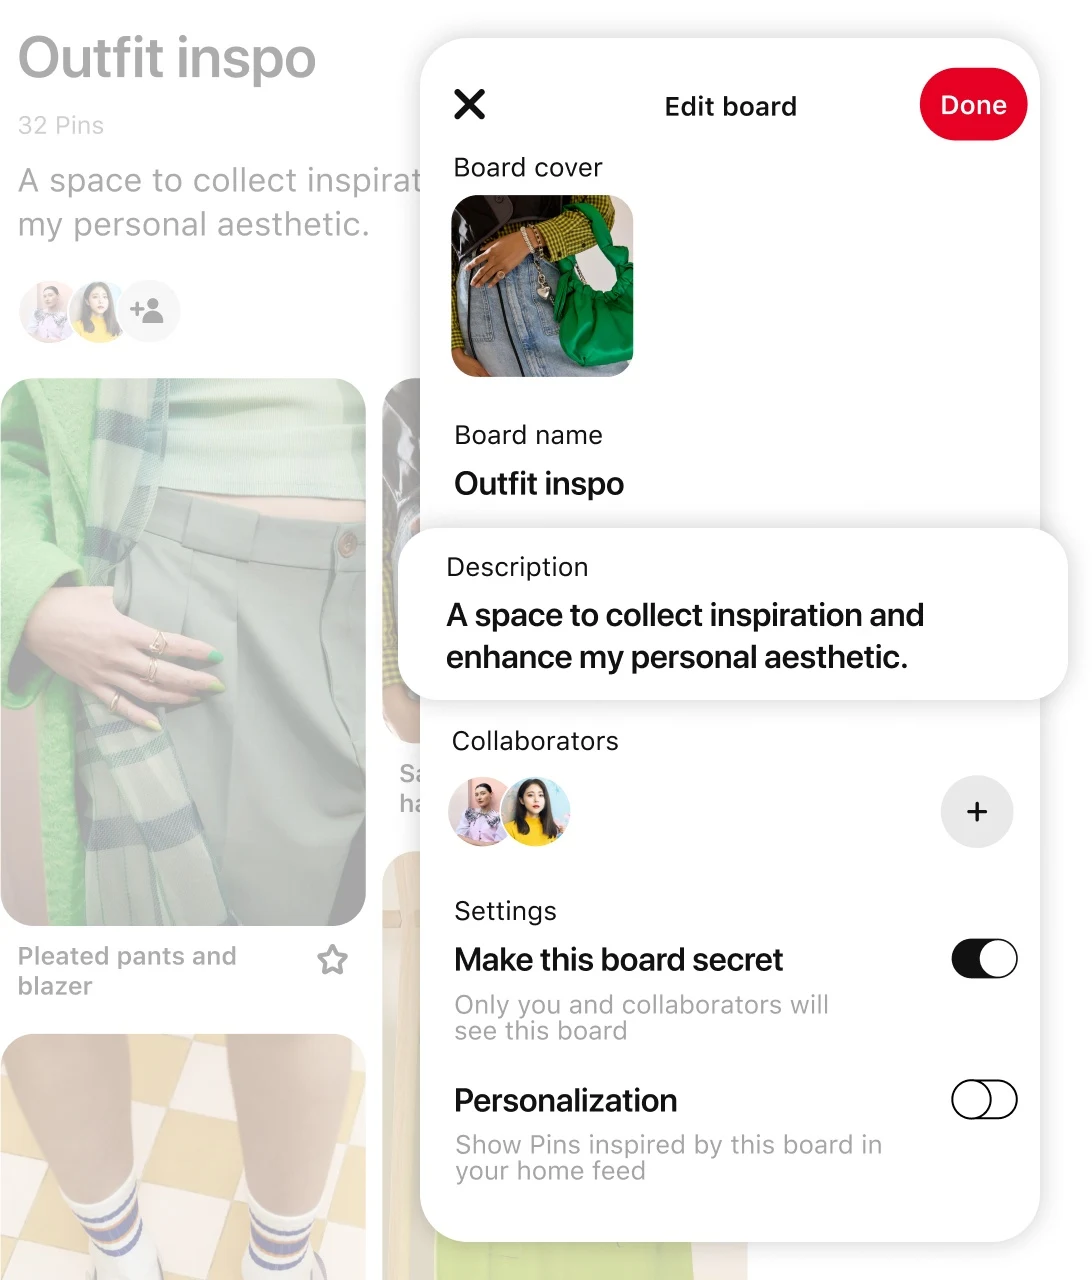 Pin grid featuring various green accessories and clothing items with demo "edit board" screen with the "description" section highlighted